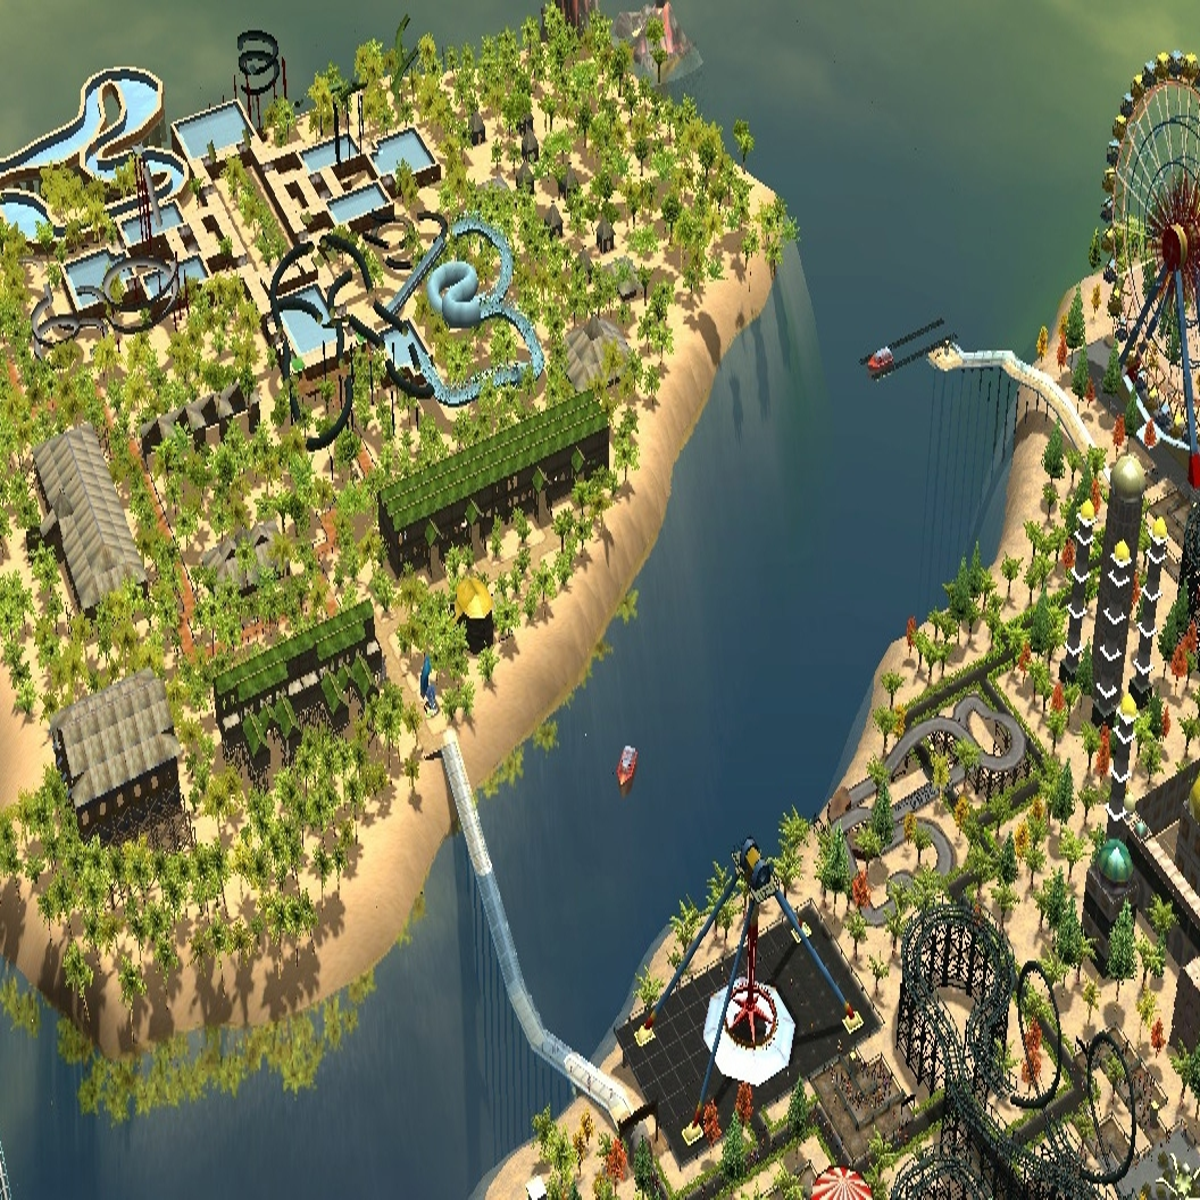 RollerCoaster Tycoon Games, PC and Steam Keys